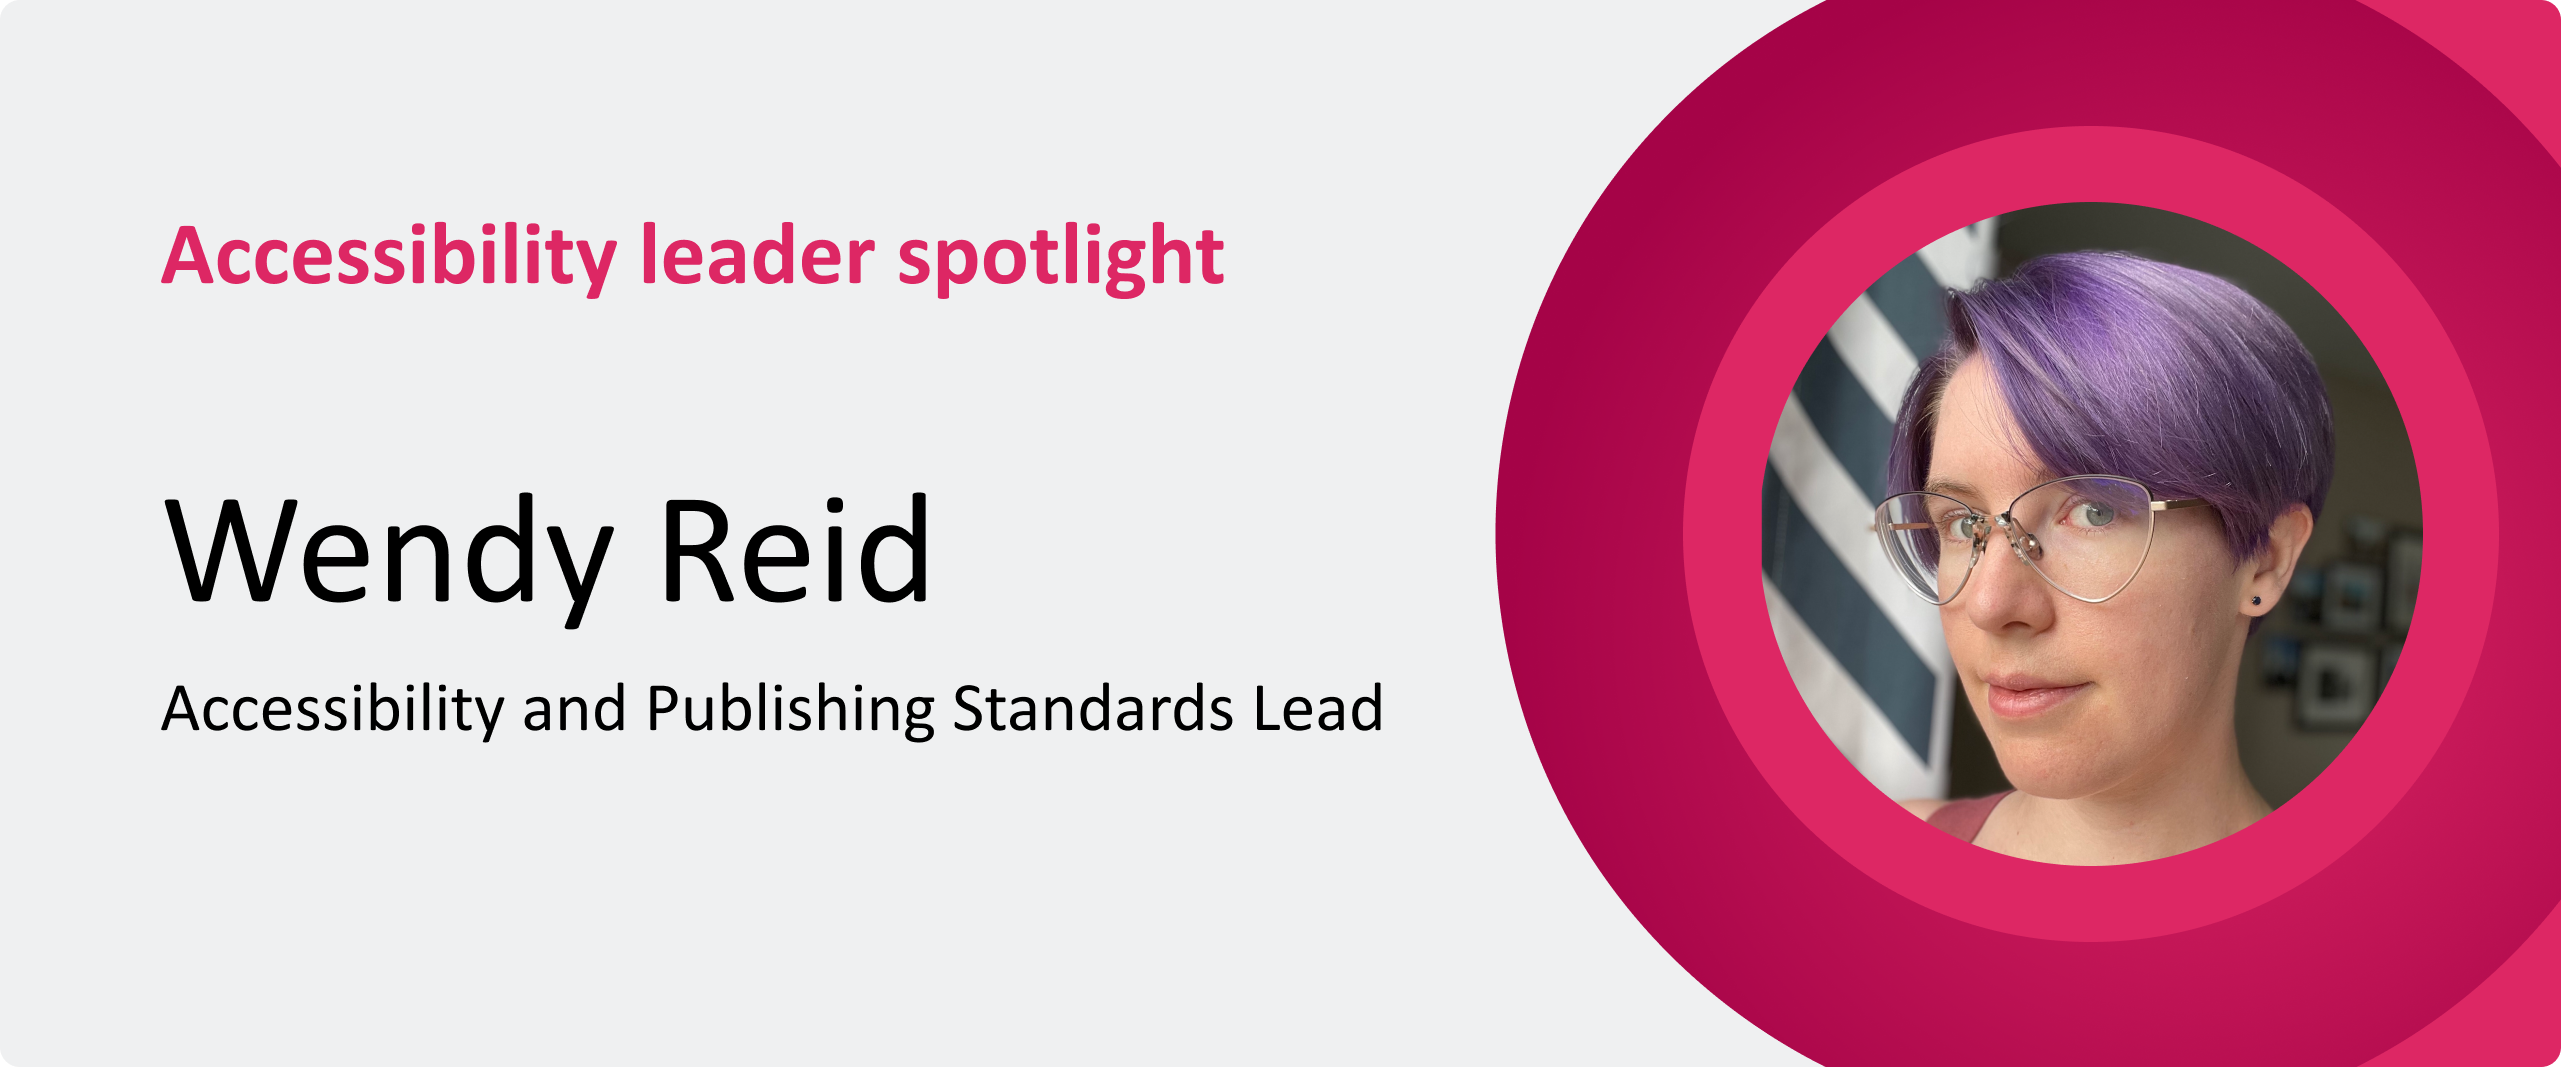 Accessibility leader spotlight image featuring Wendy Reid, Accessibility and Publishing Standards Lead, Rakuten Kobo. Wendy has a short haircut dyed purple